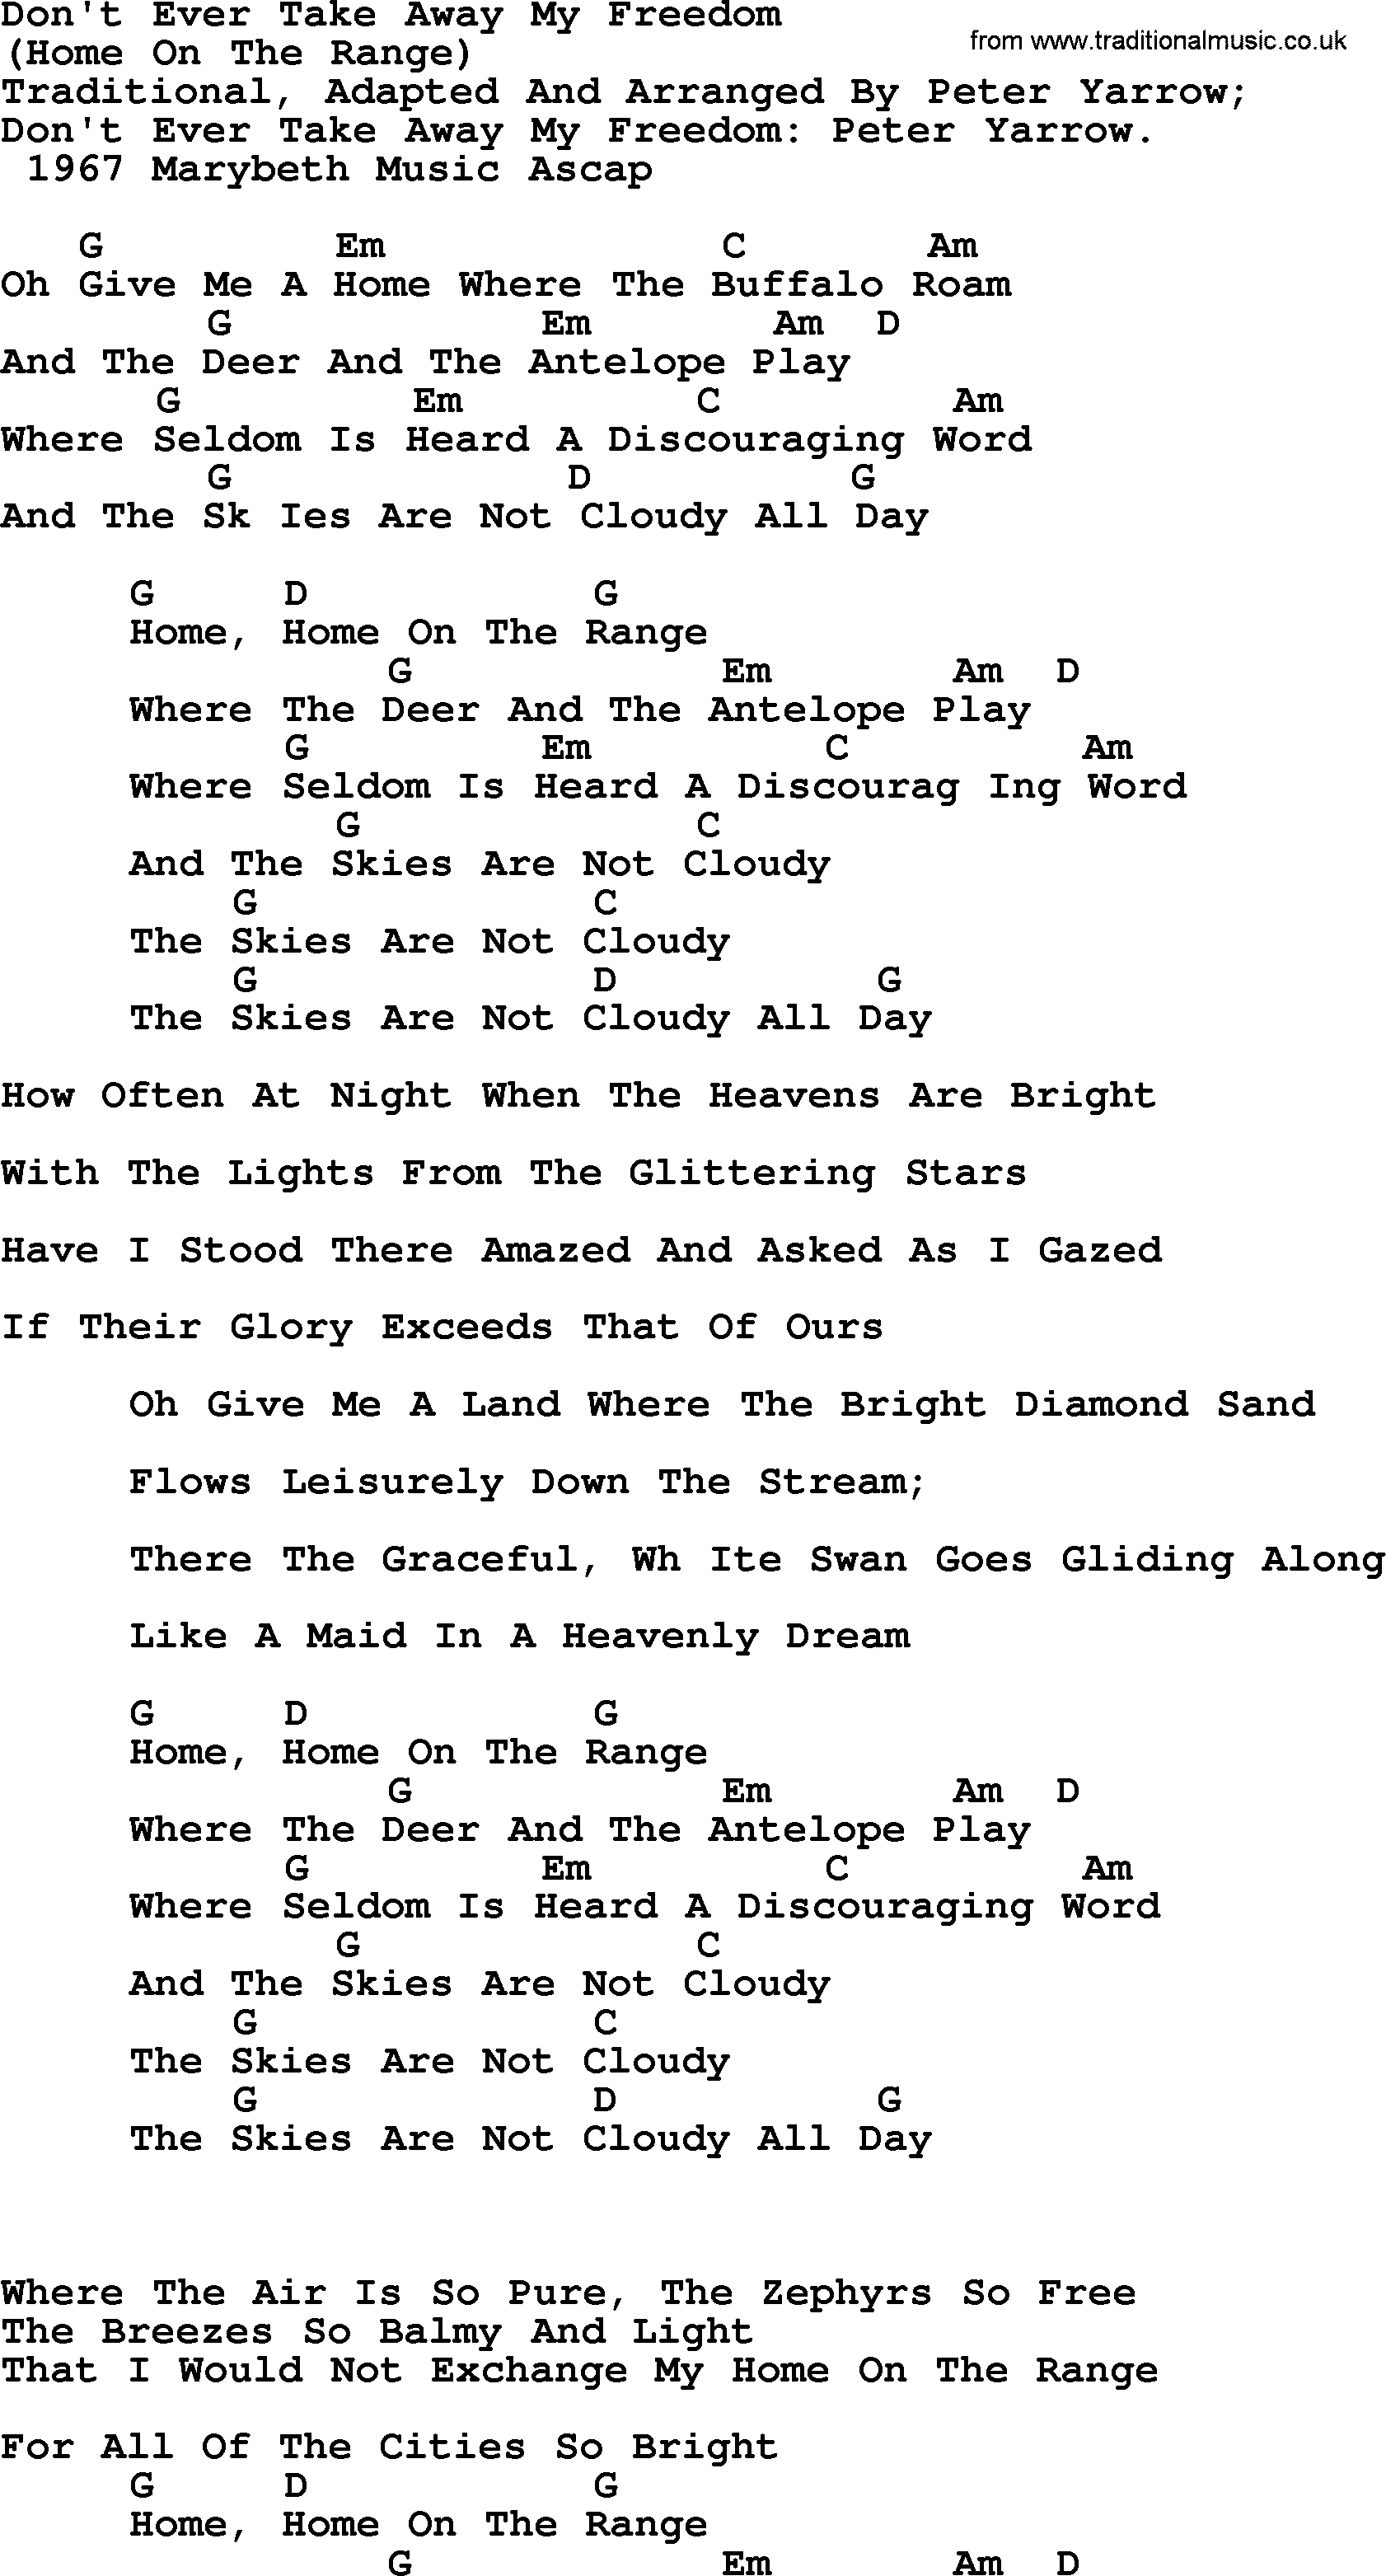 Peter, Paul and Mary song Home On The Range, lyrics and chords